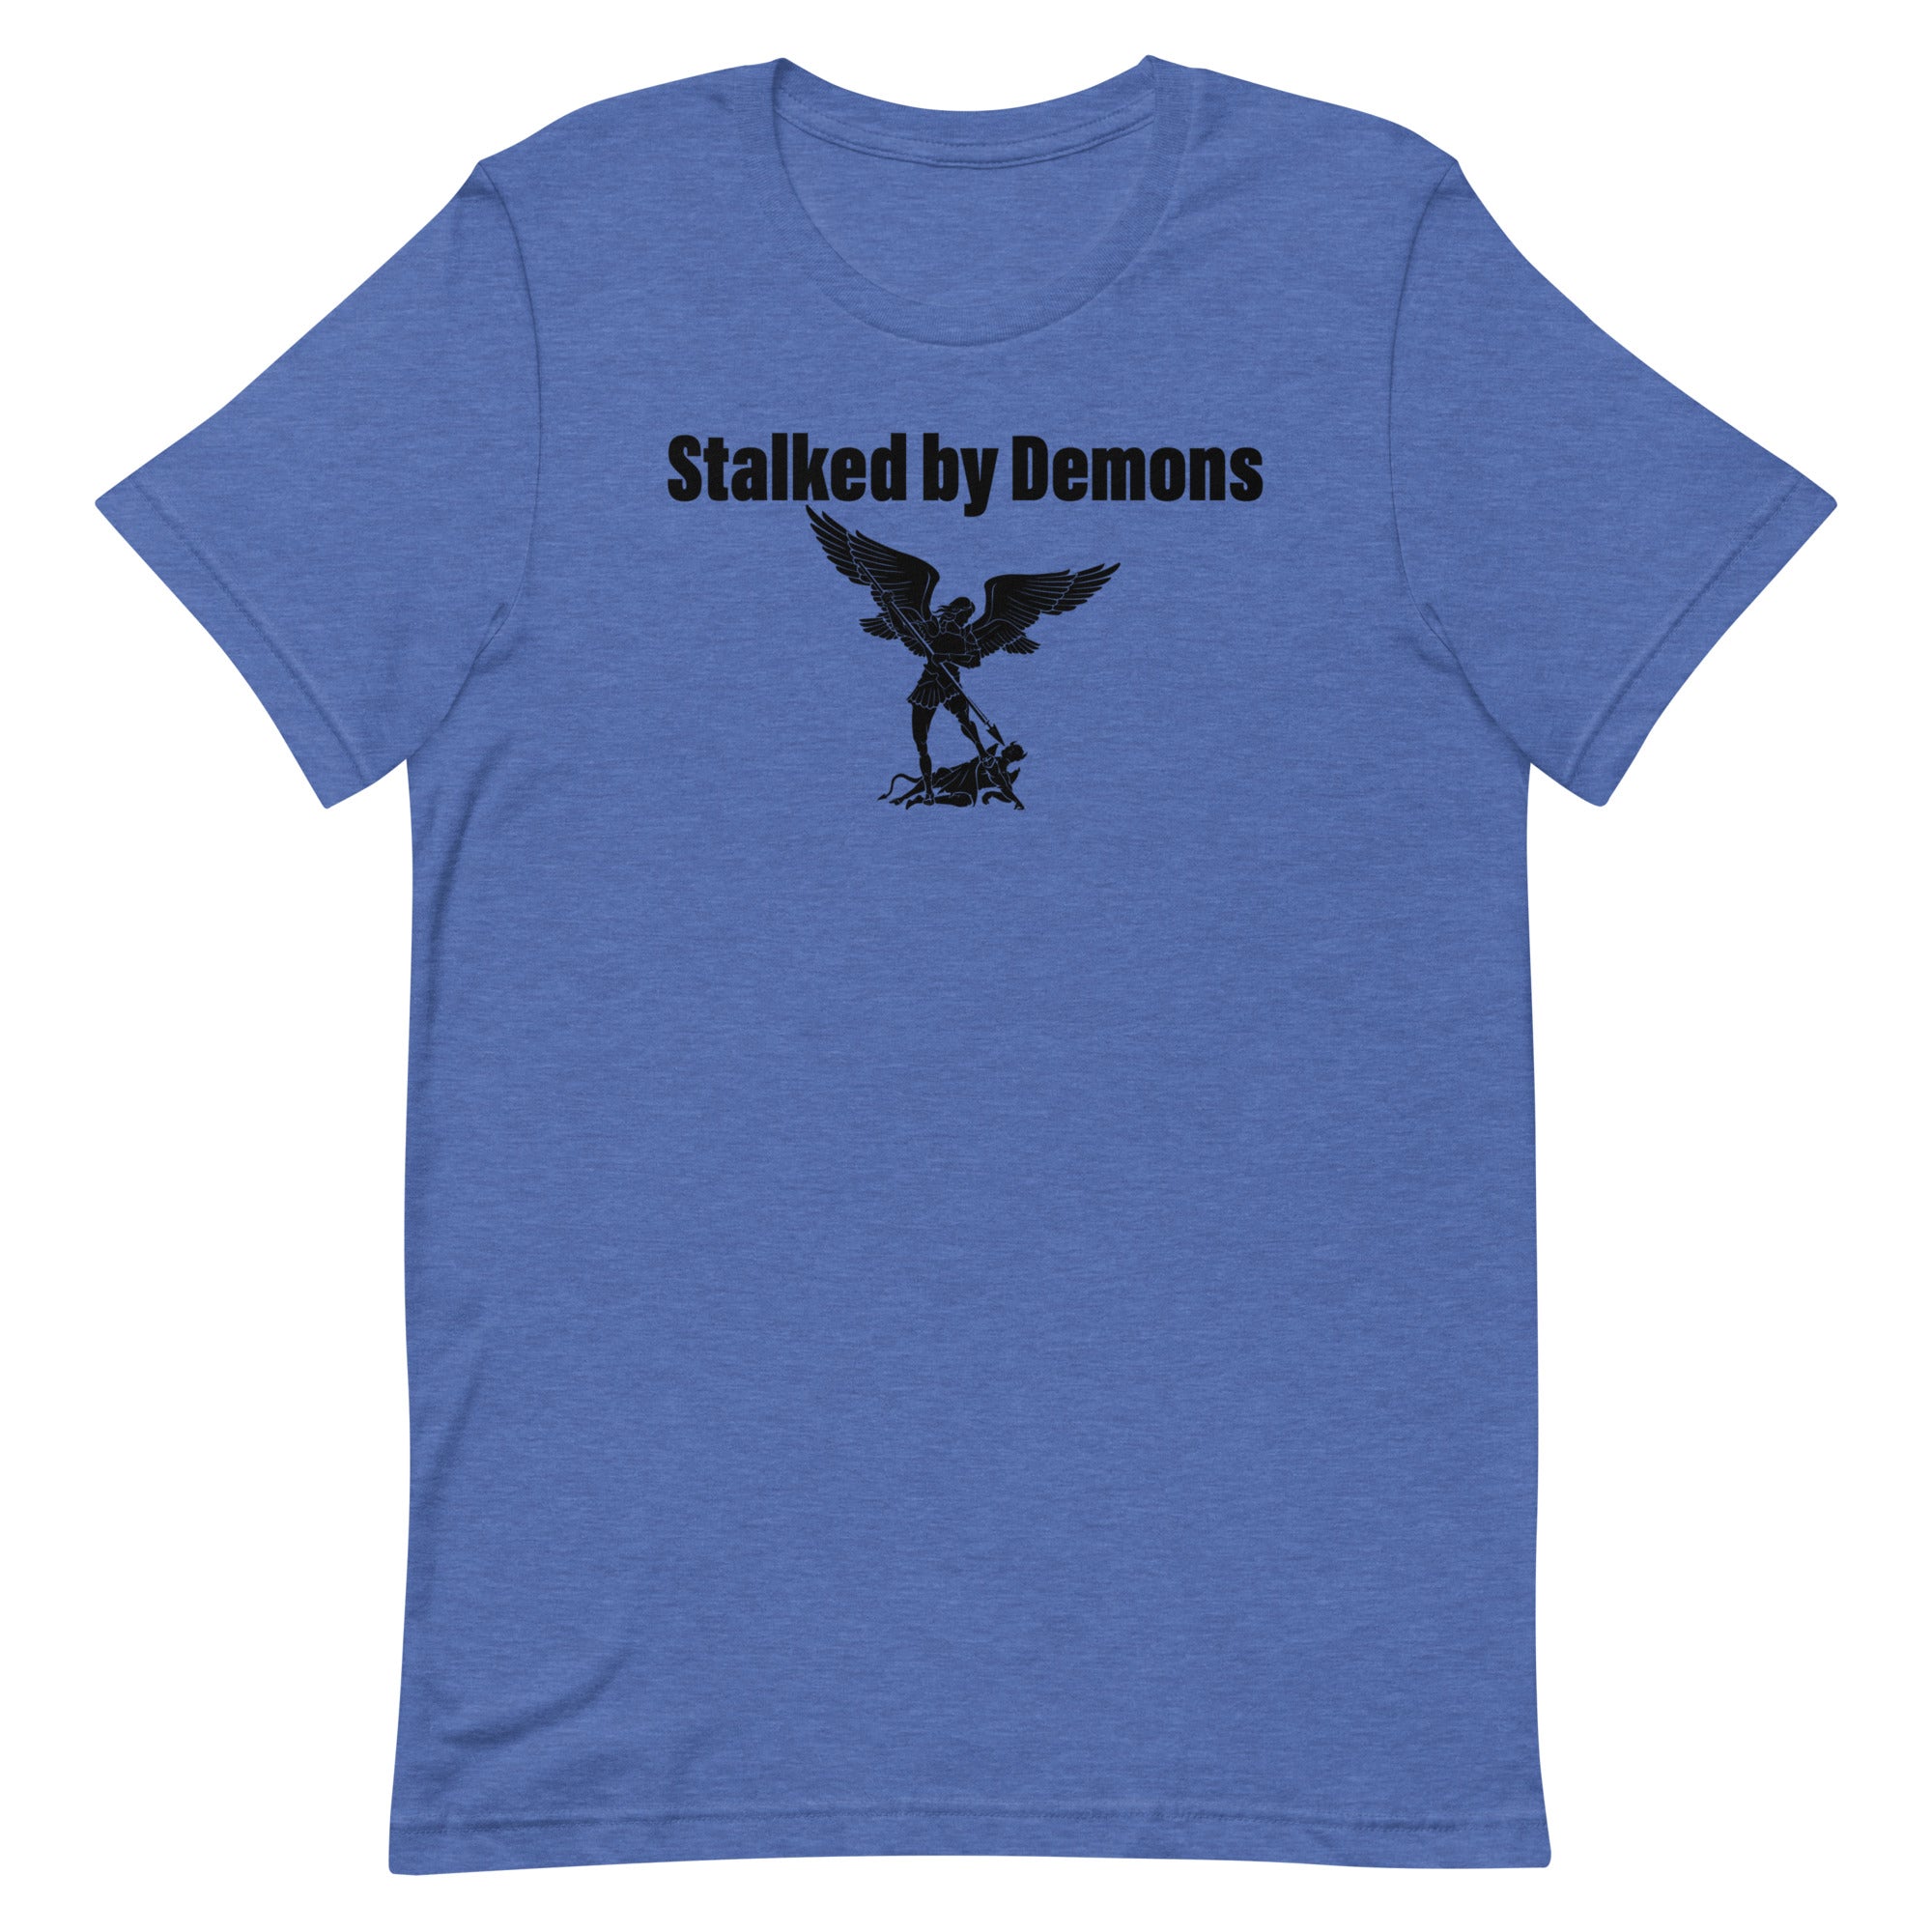 STALKED BY DEMONS GUARDED BY ANGELS FRONT AND BACK UNISEX T-SHIRT